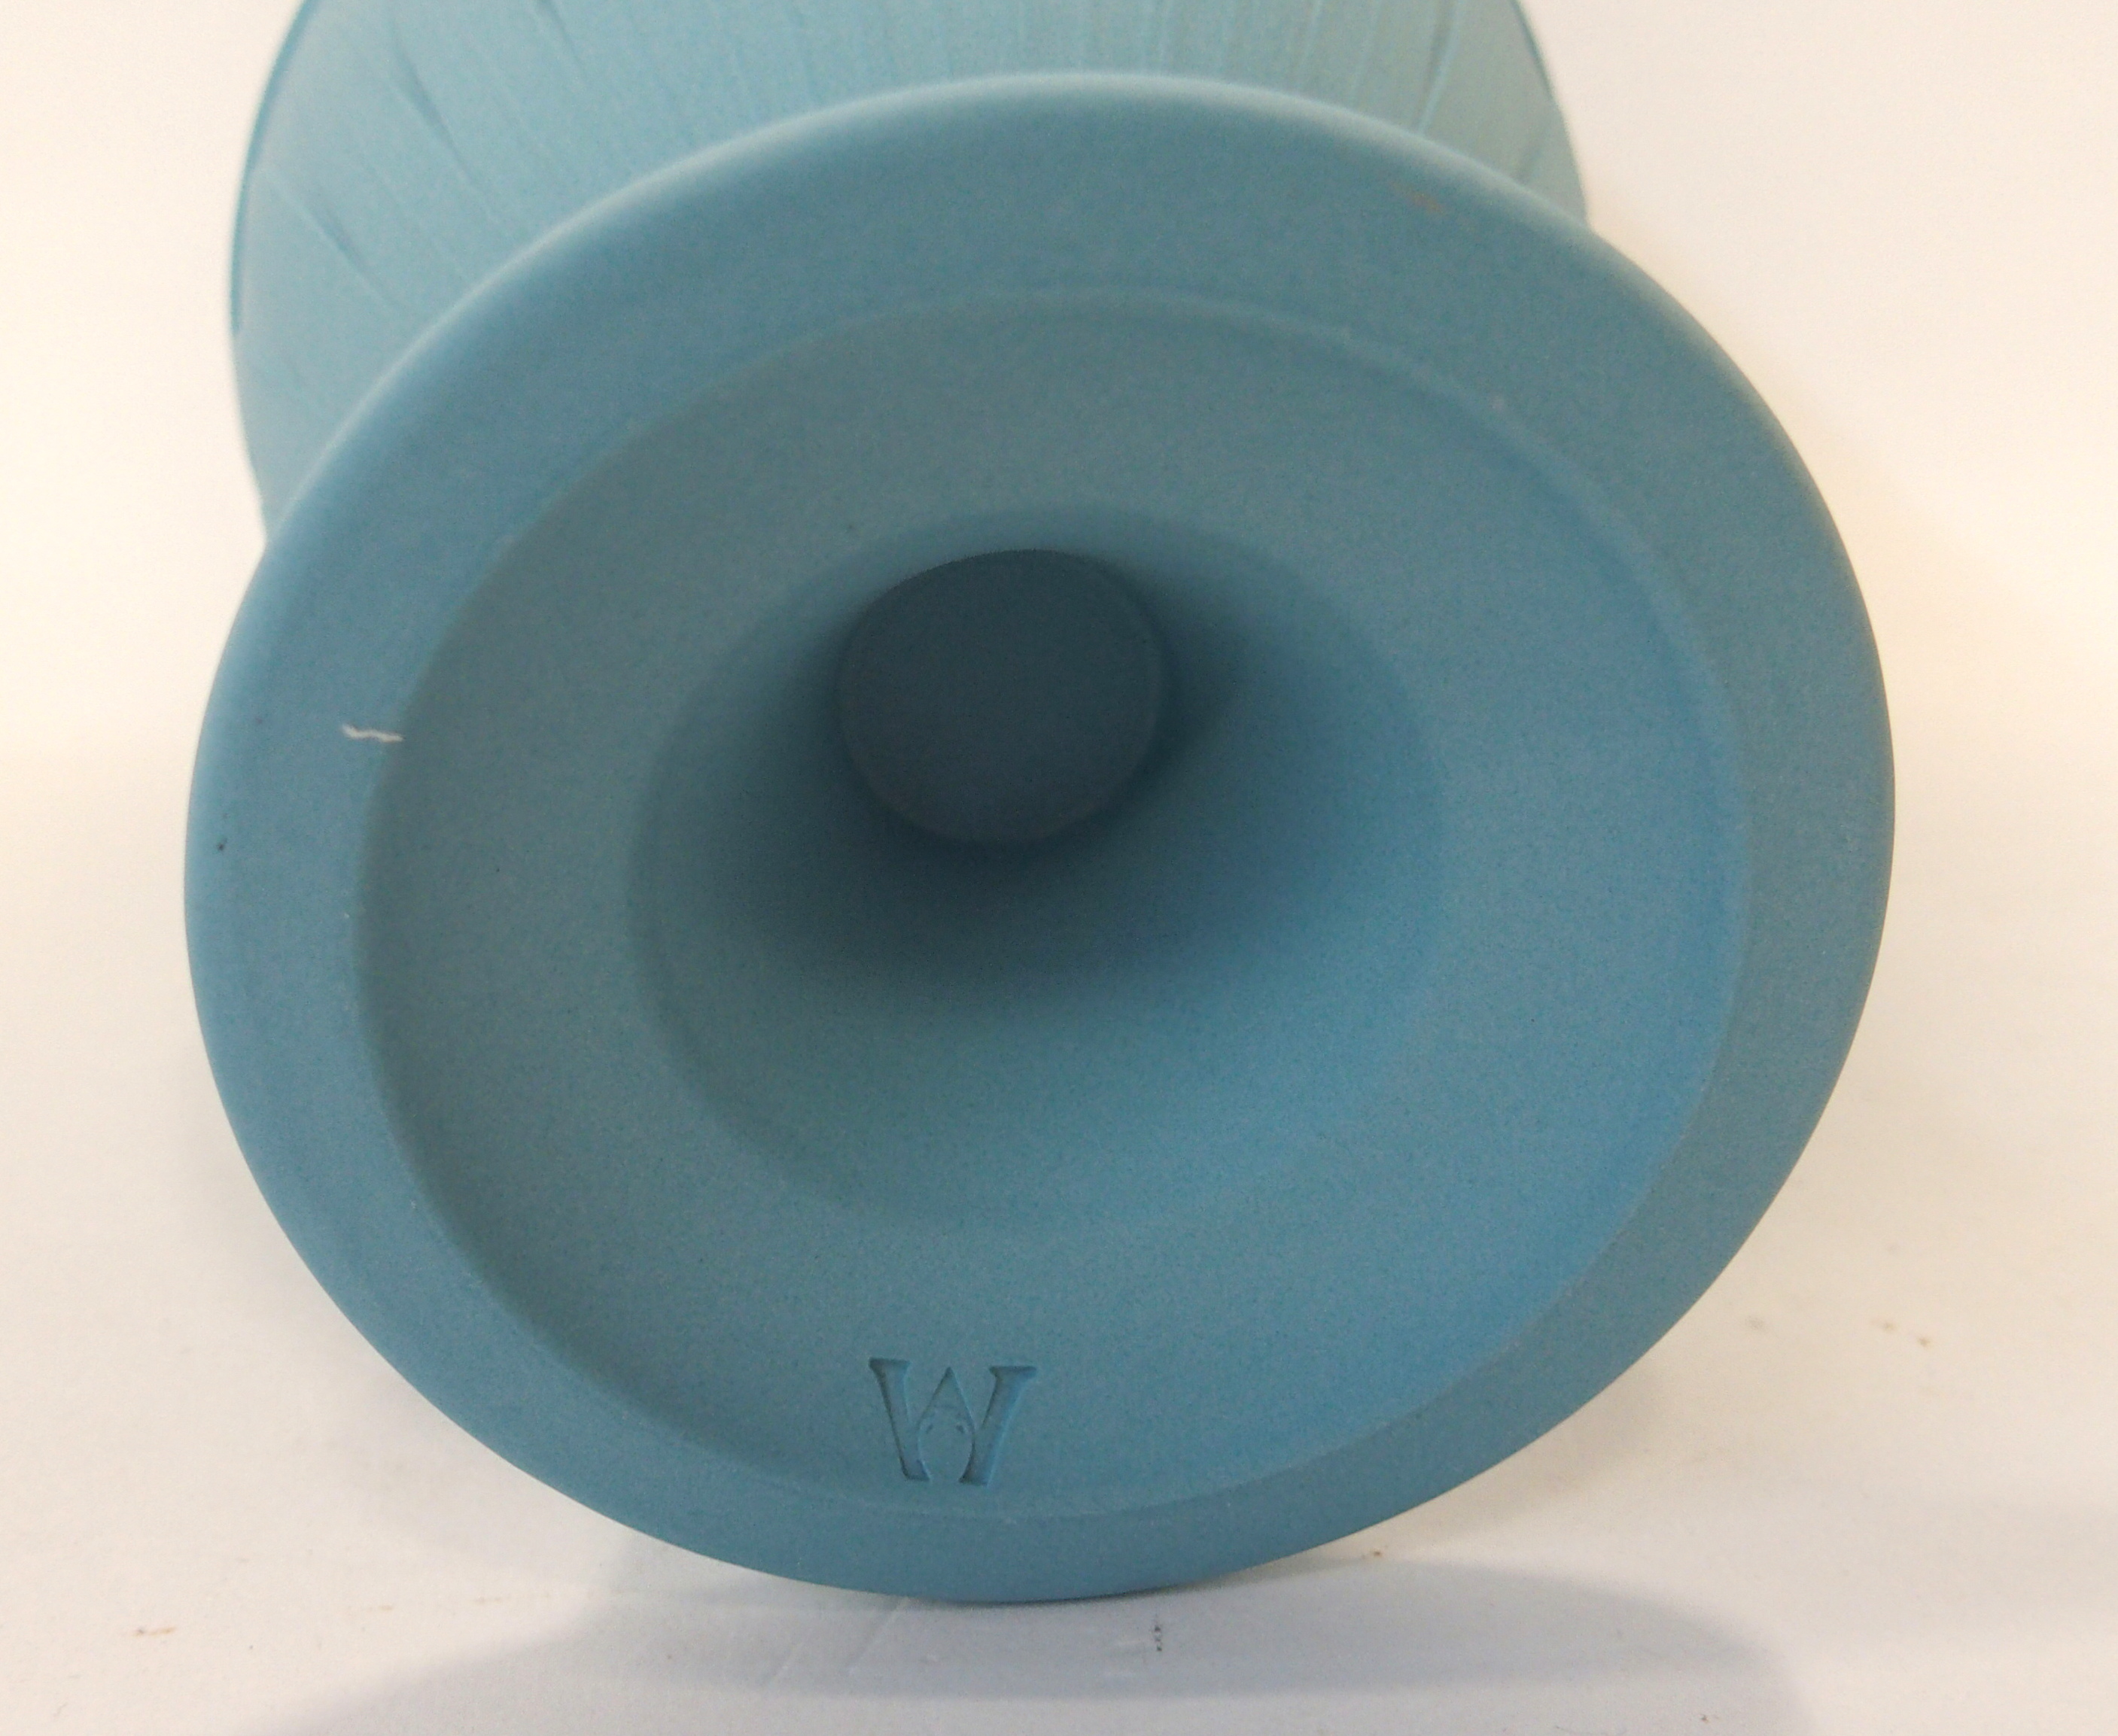 A Wedgwood classic vase, in white on turquoise, 20cm high, with box, a Portmeirion vase 'Sapphire' - Image 6 of 6